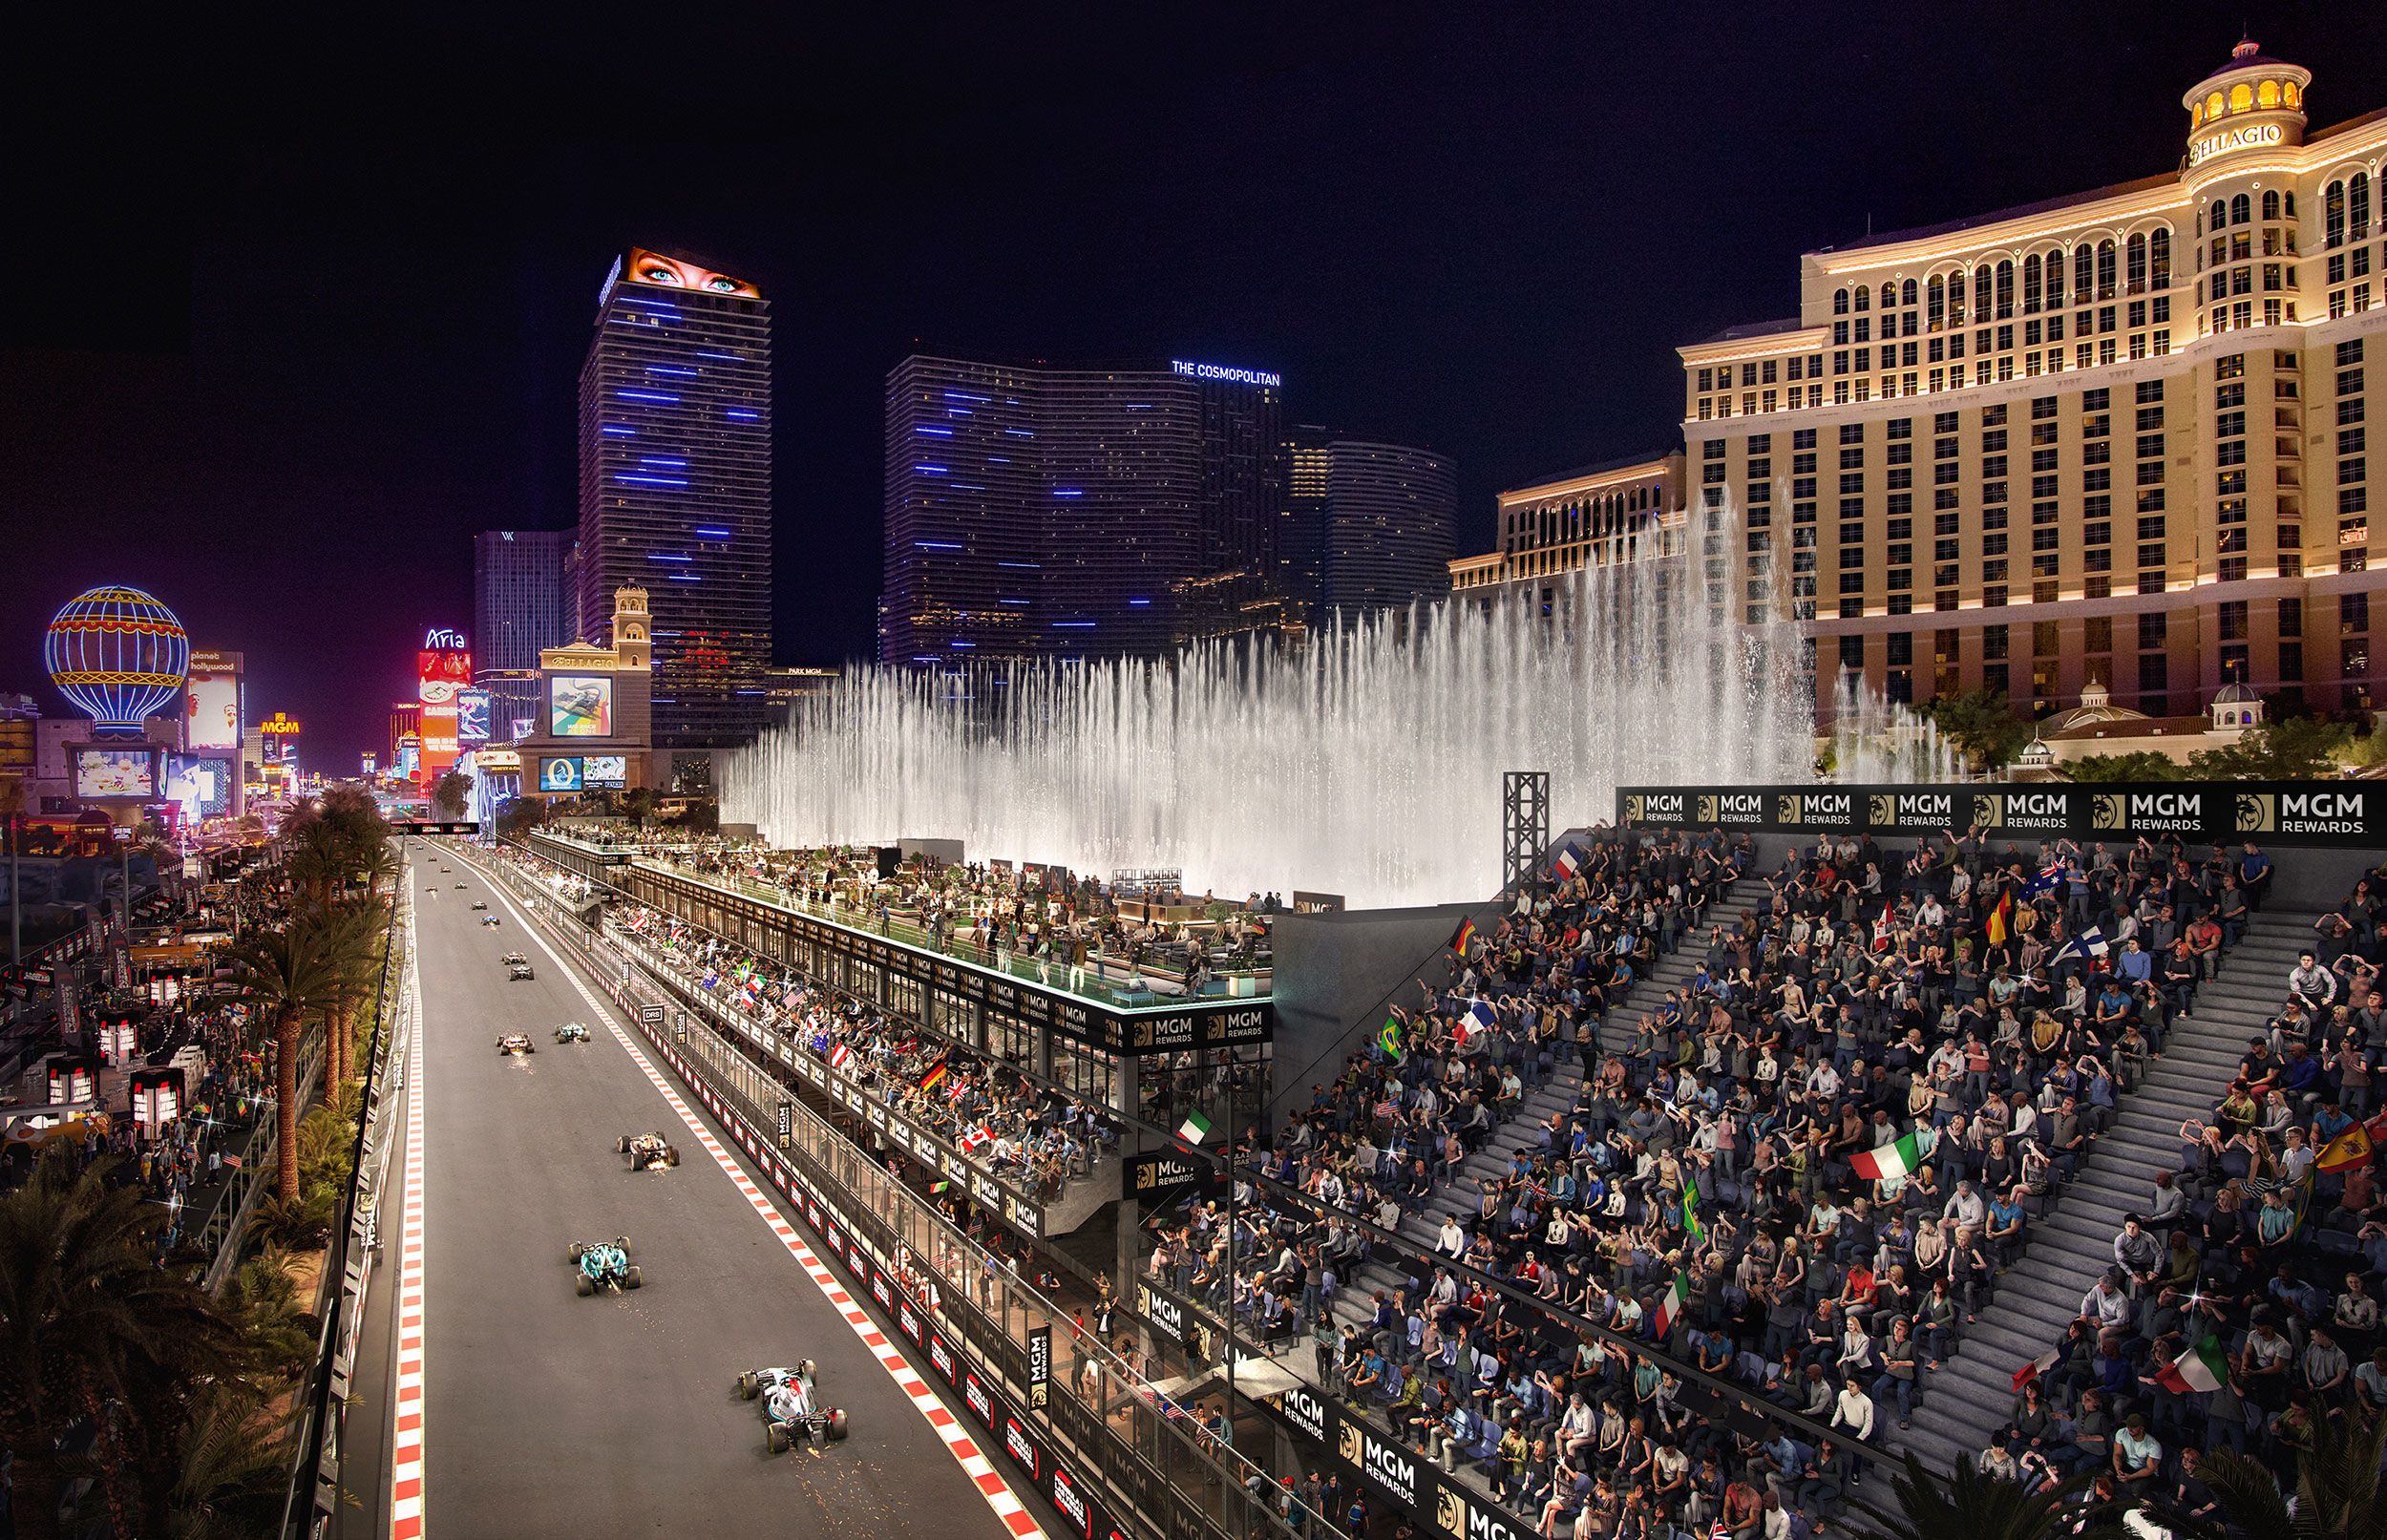 Formula One's inaugural Las Vegas Grand Prix is this weekend. Not everyone  is thrilled about it